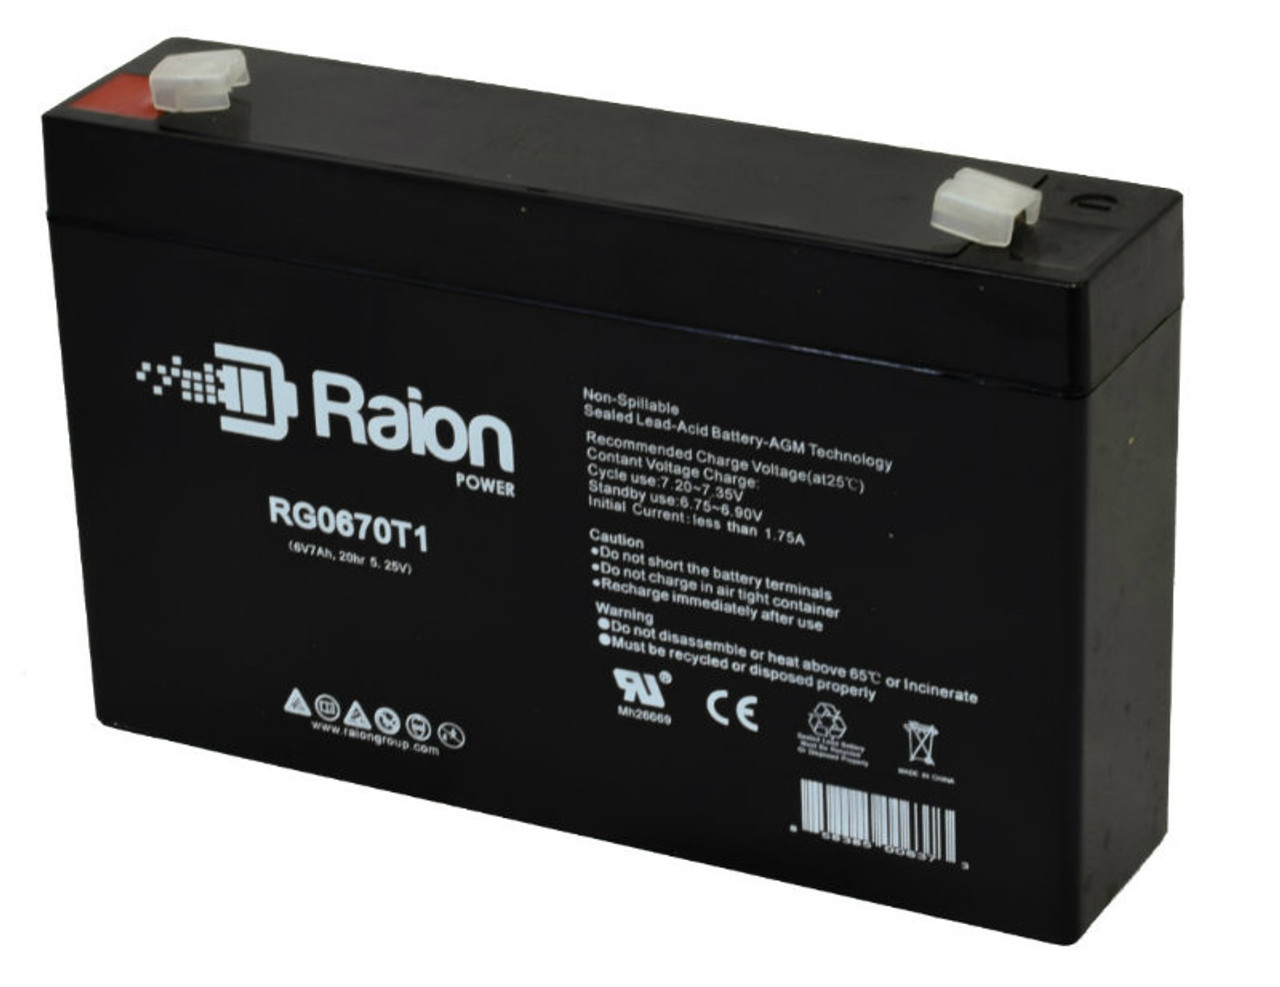 Raion Power RG0670T1 6V 7Ah Replacement Battery Cartridge for Philips 200 medical equipment